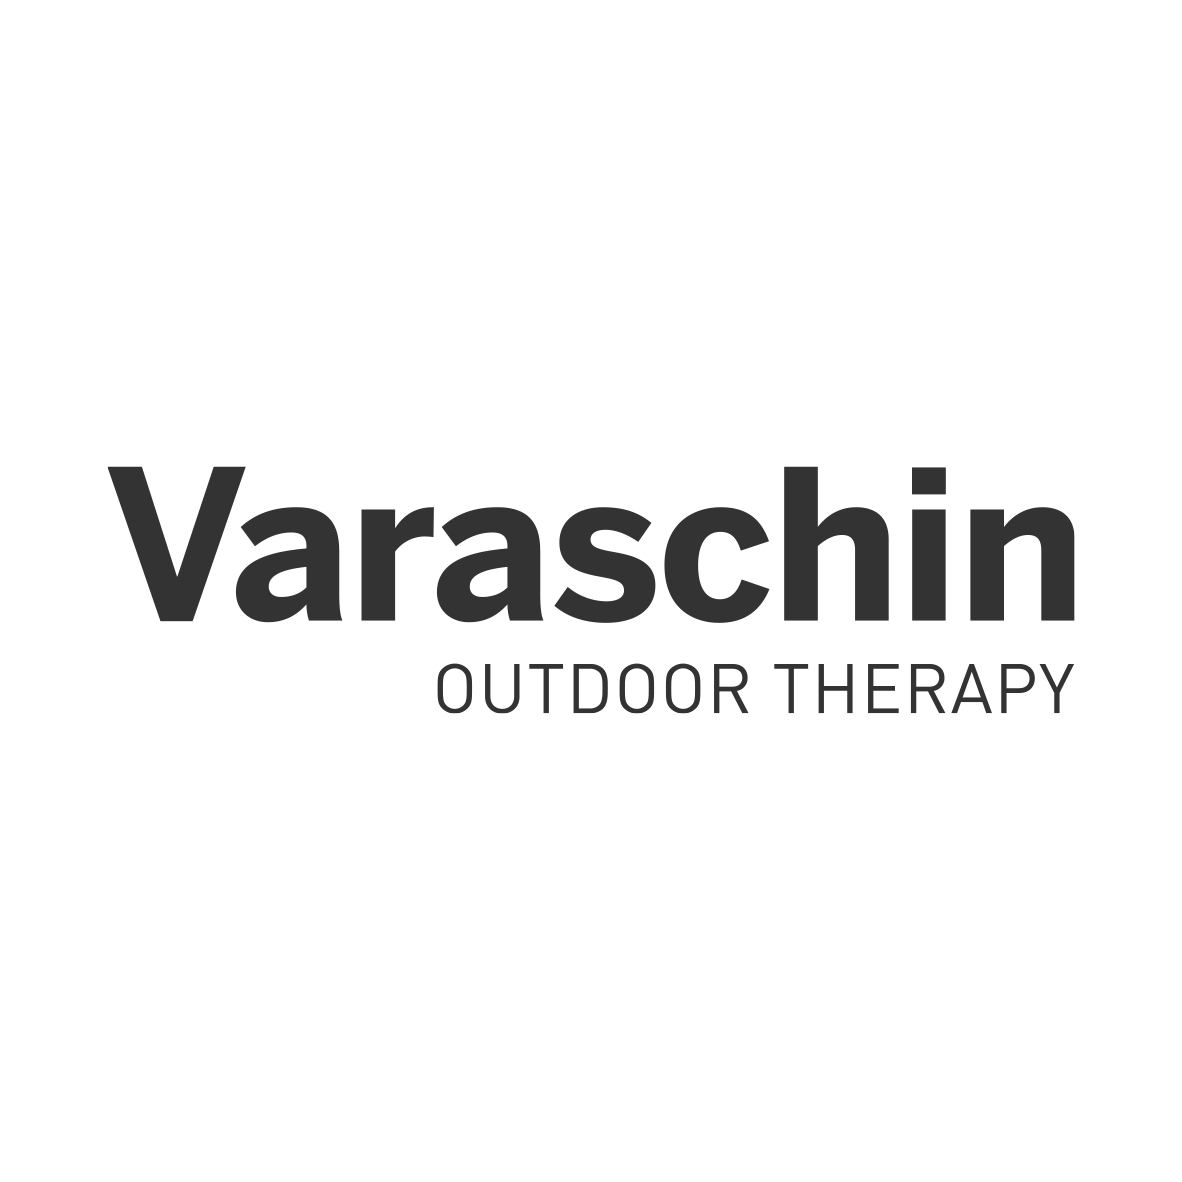 Varaschin Outdoor Therapy